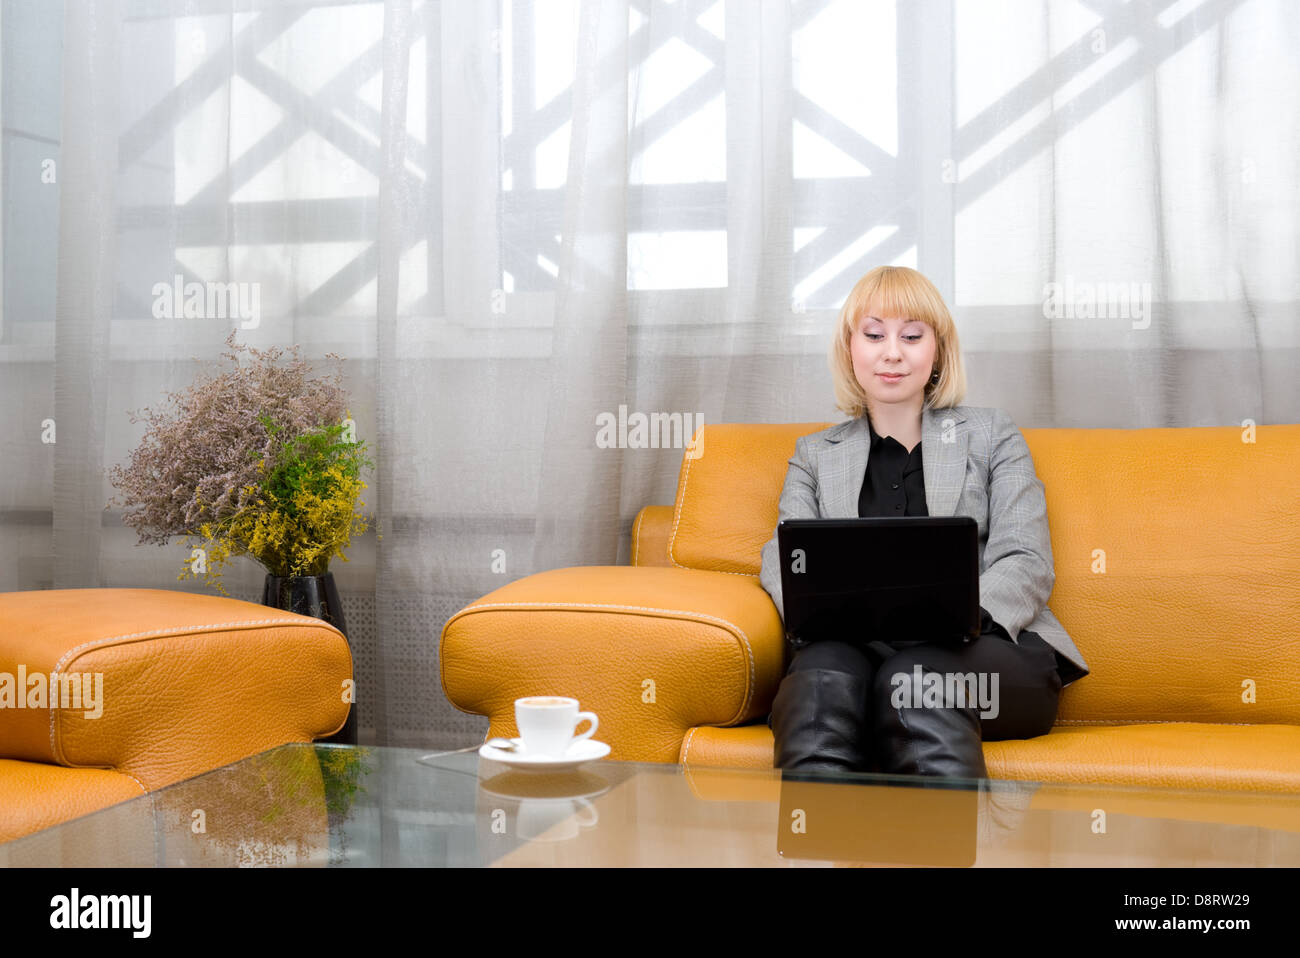 blonde woman with laptop in comfort hall Stock Photo